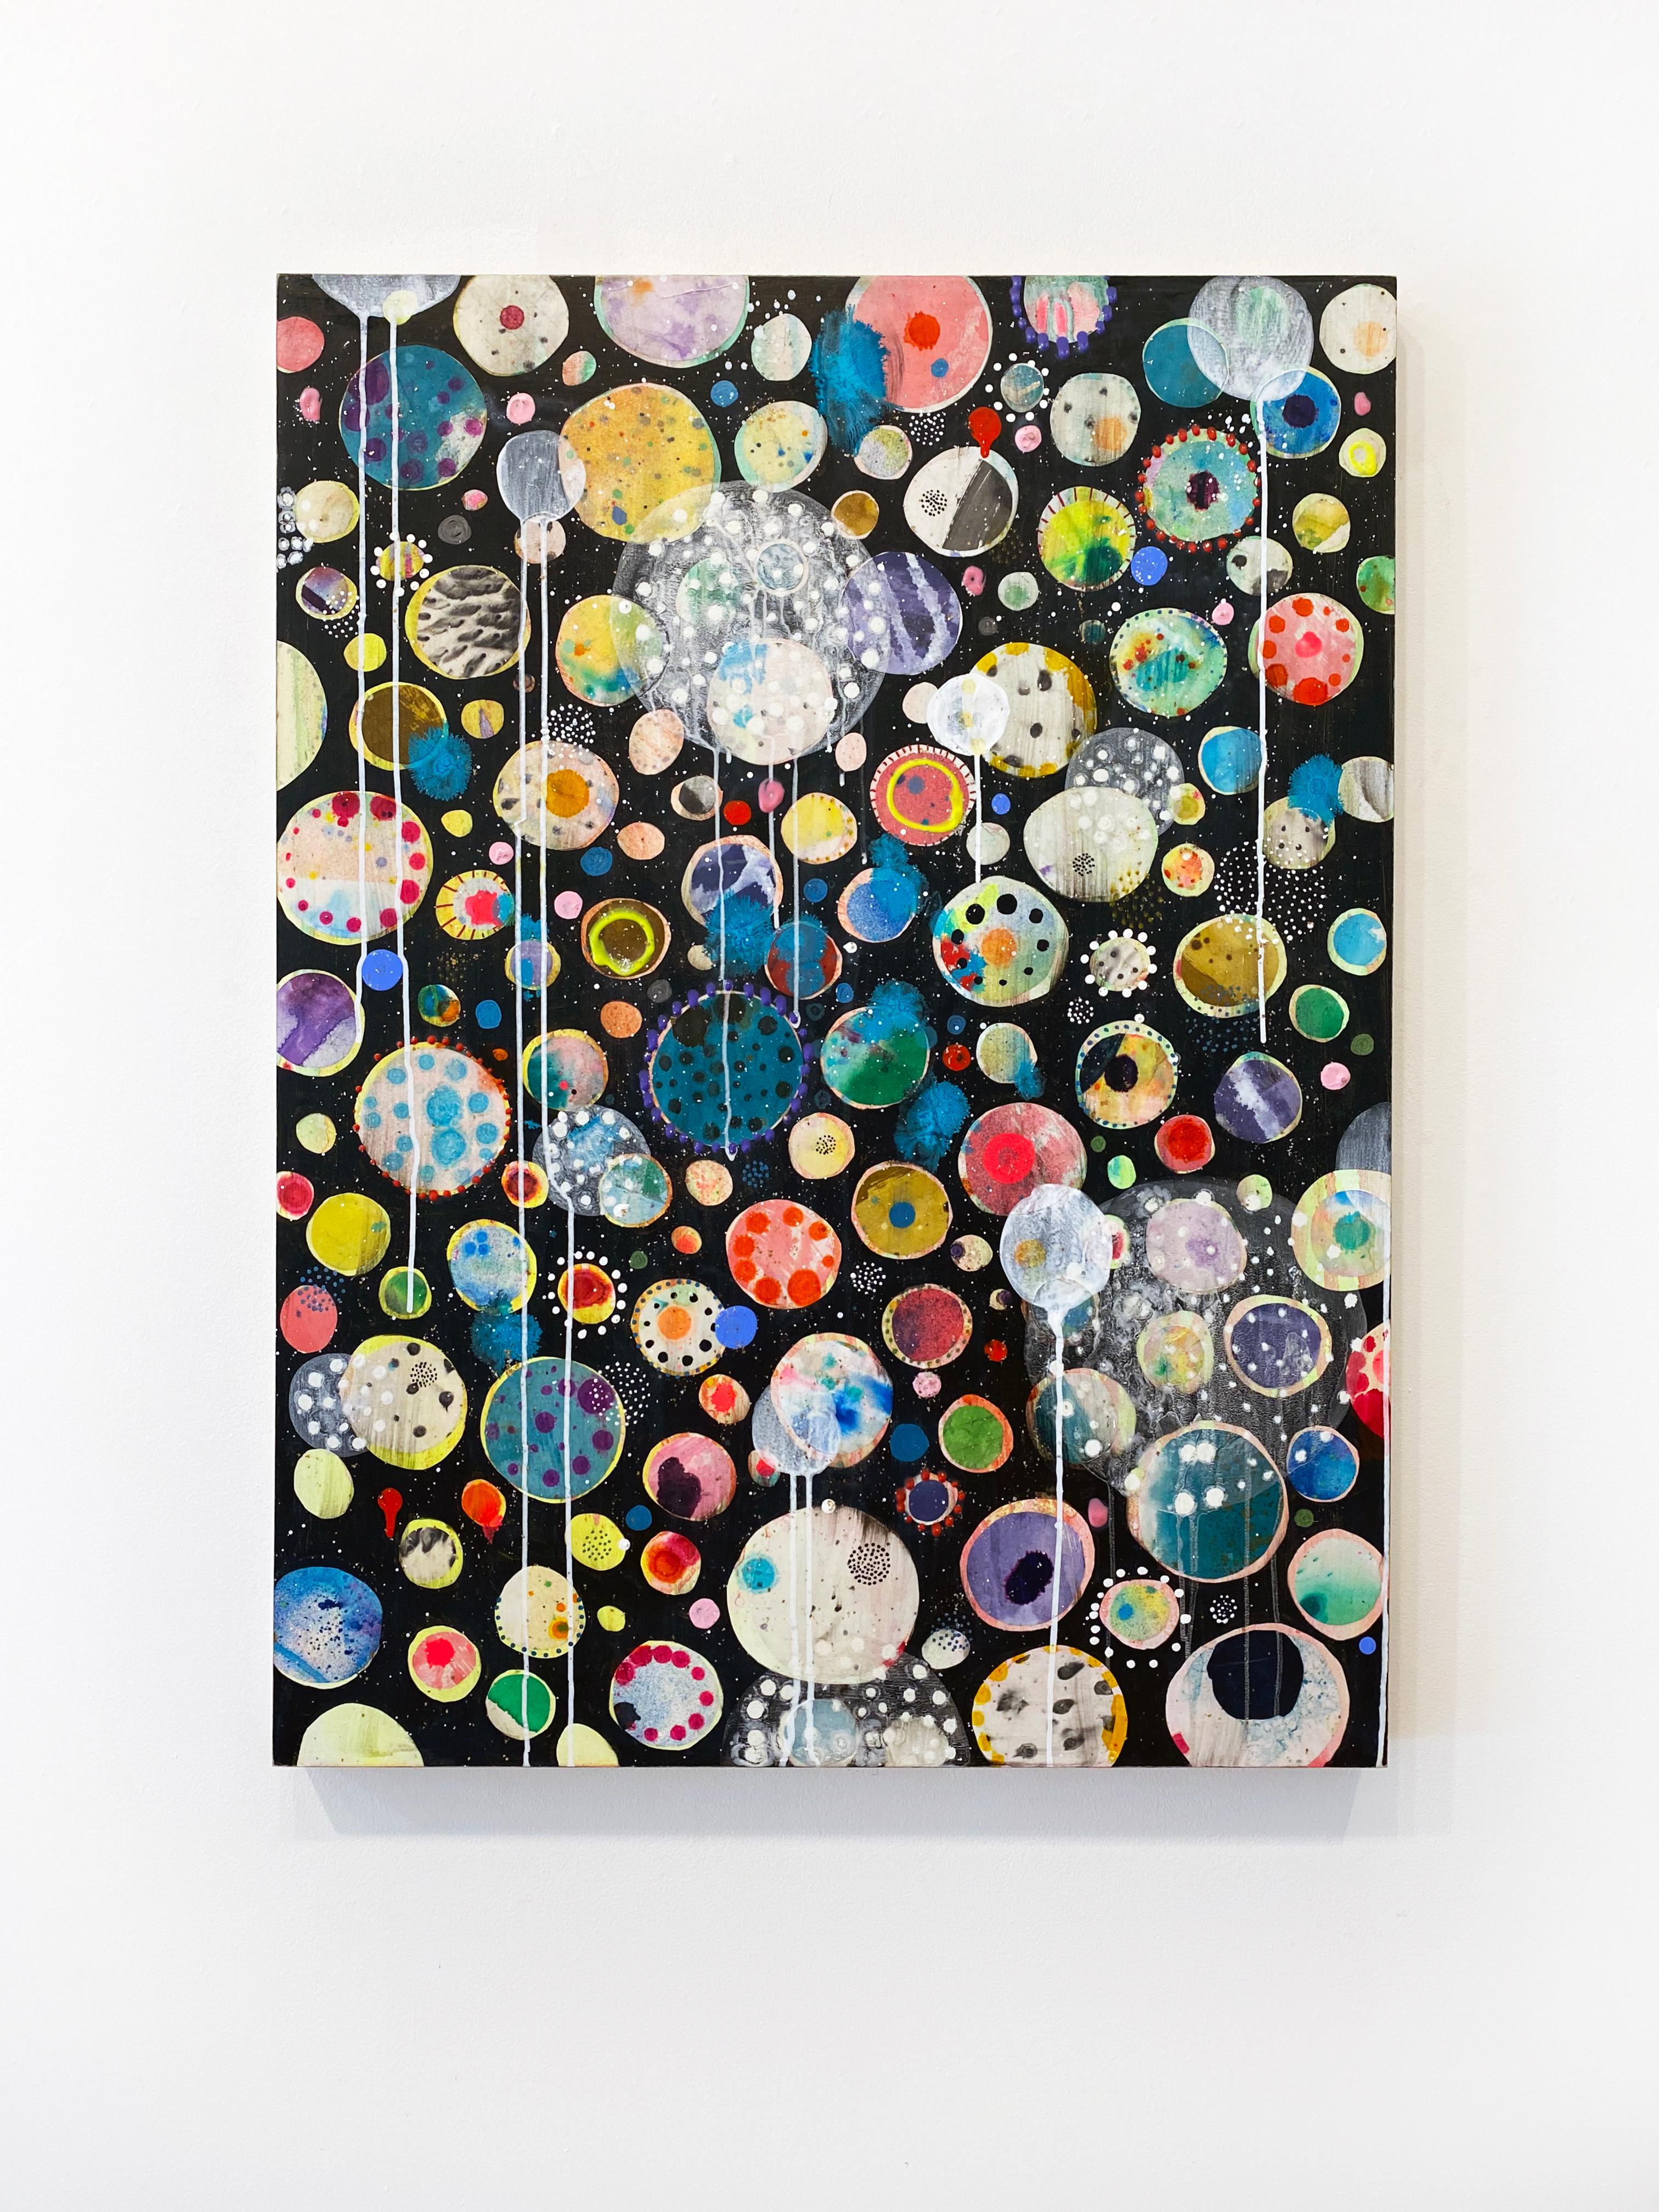 Abstract, Colorful Mixed Media Painting by Liz Tran 'Perseid II' For Sale 1